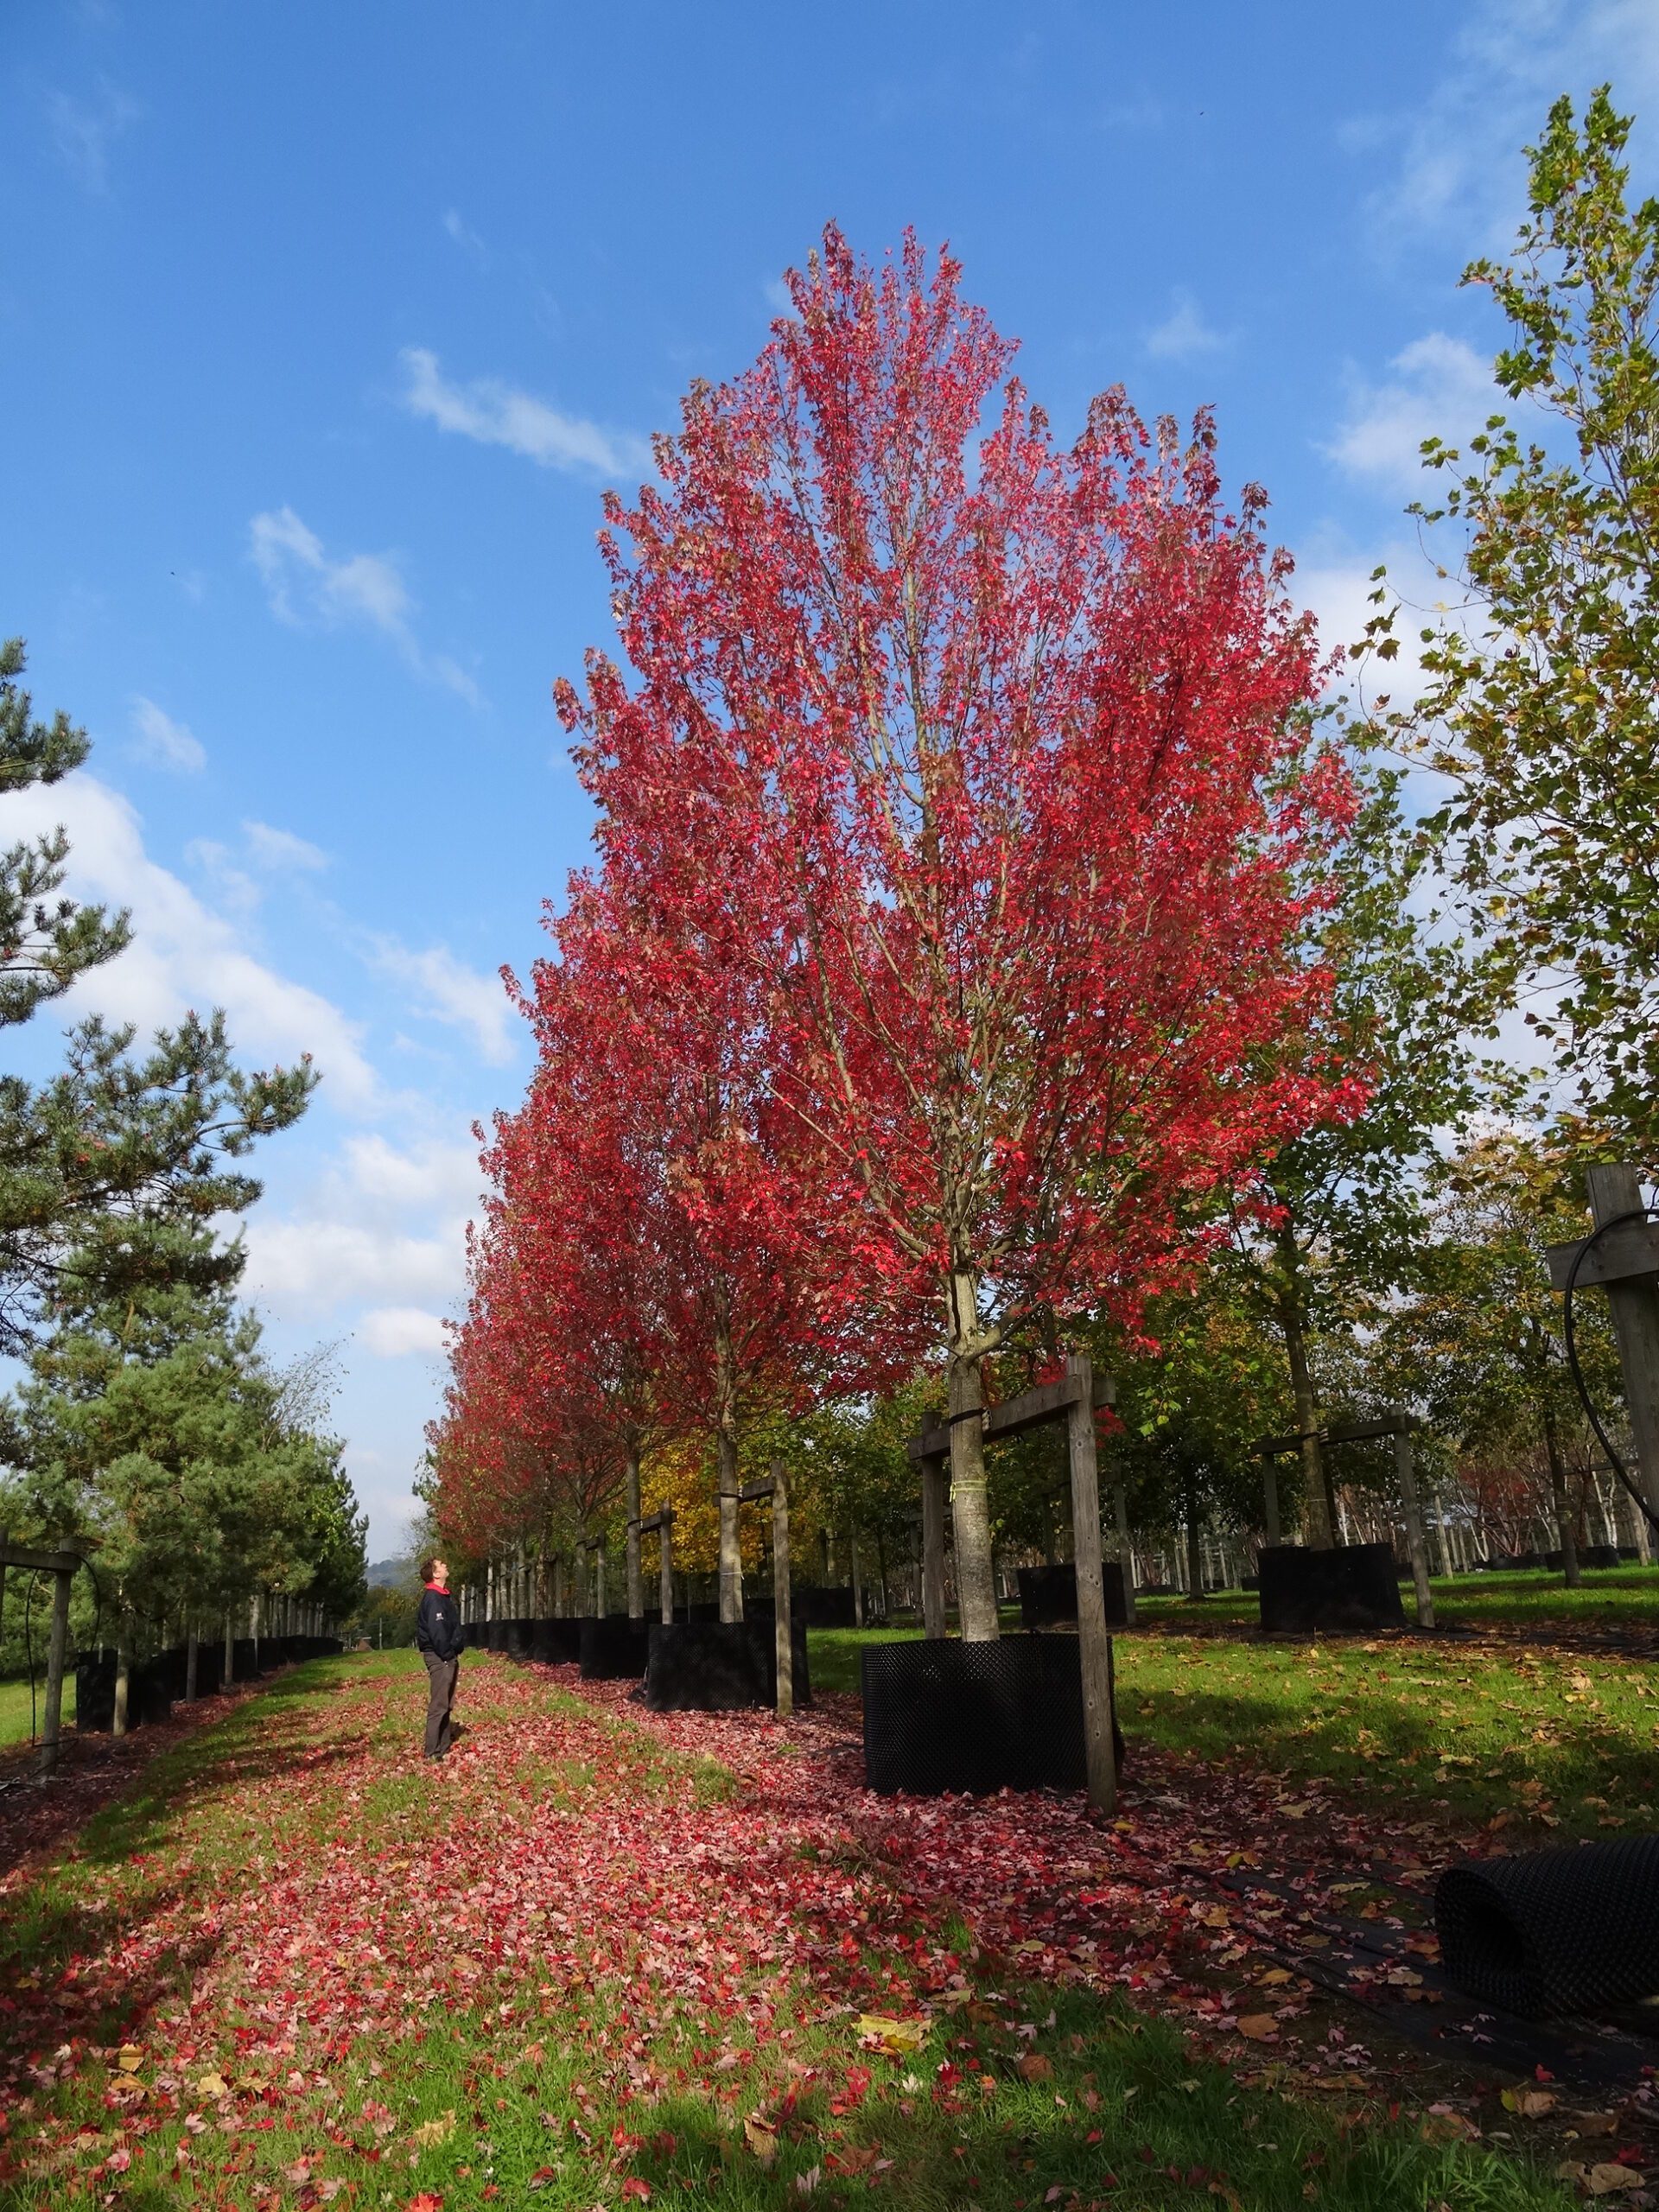 Acer freemanii Armstrong super semi-mature trees in autumn colour growing in containers